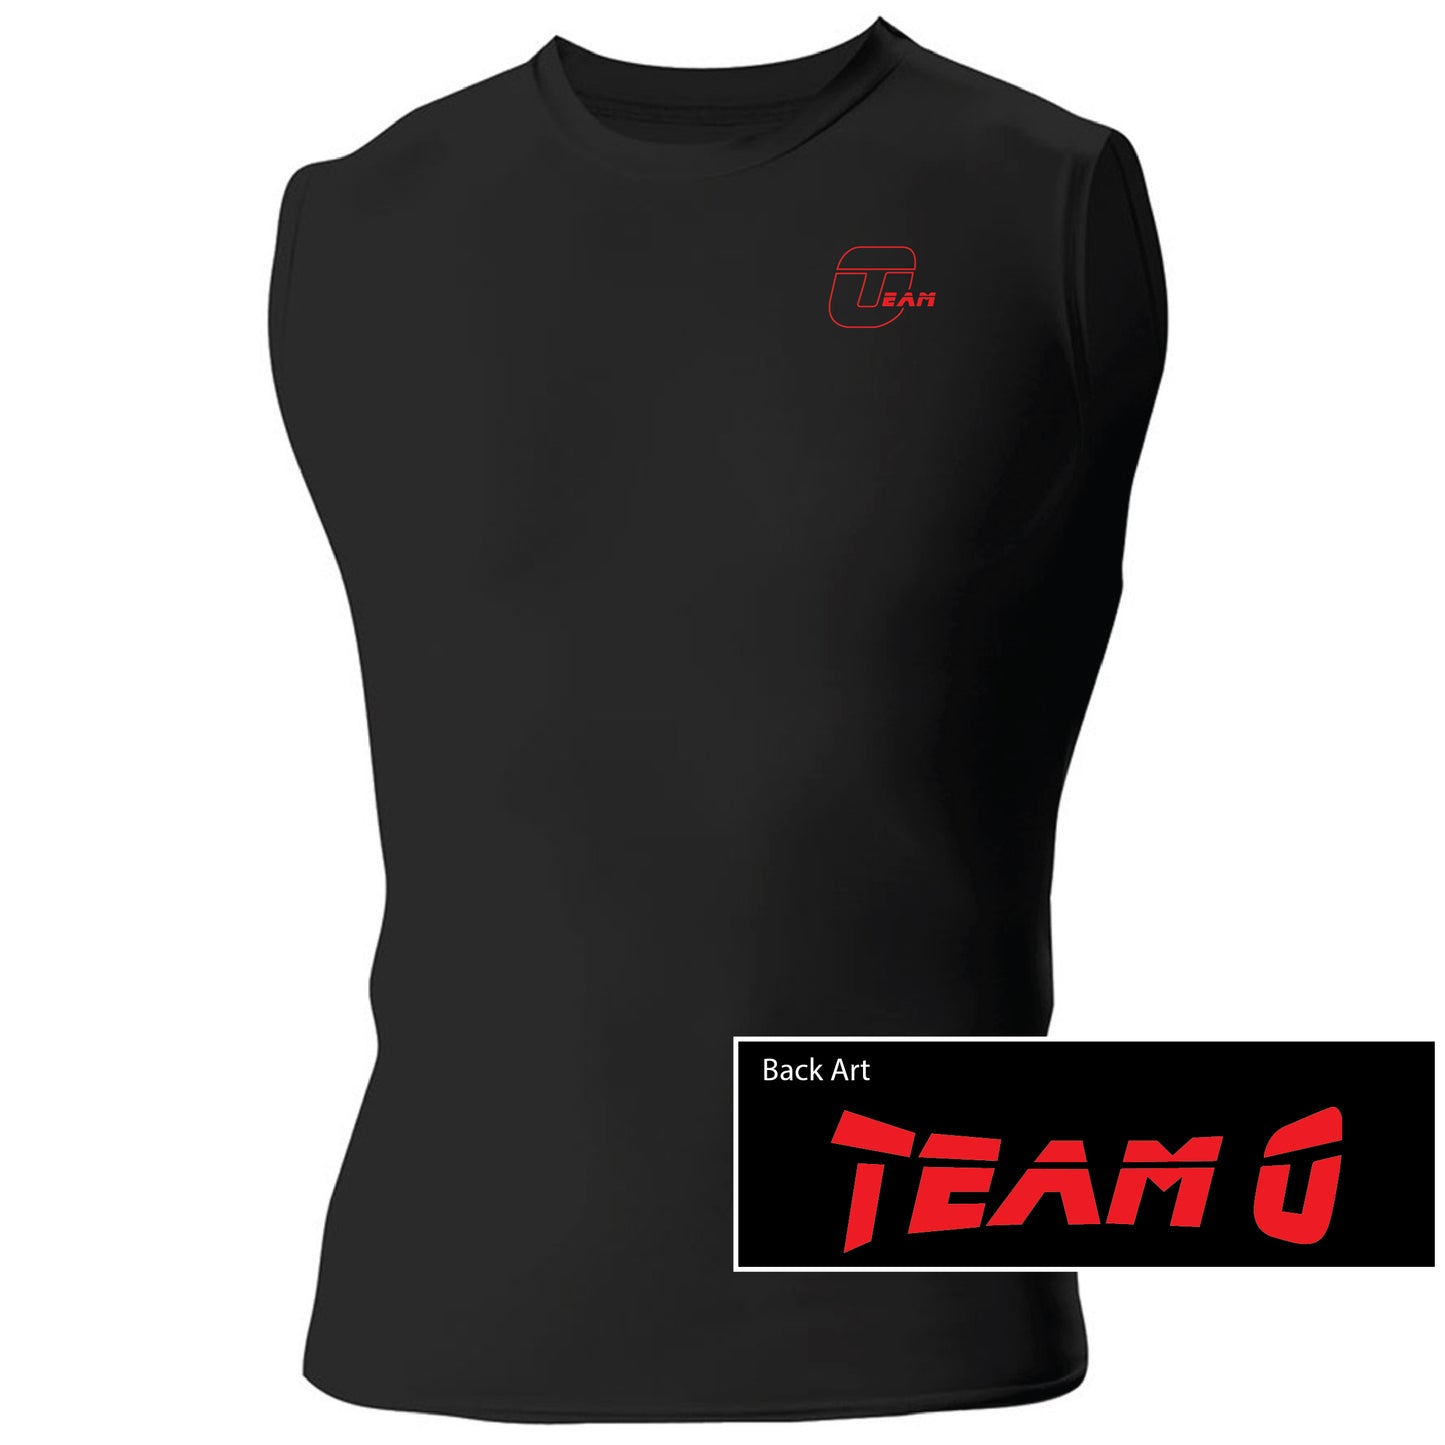 Team O A4 Men's Compression Muscle Shirt